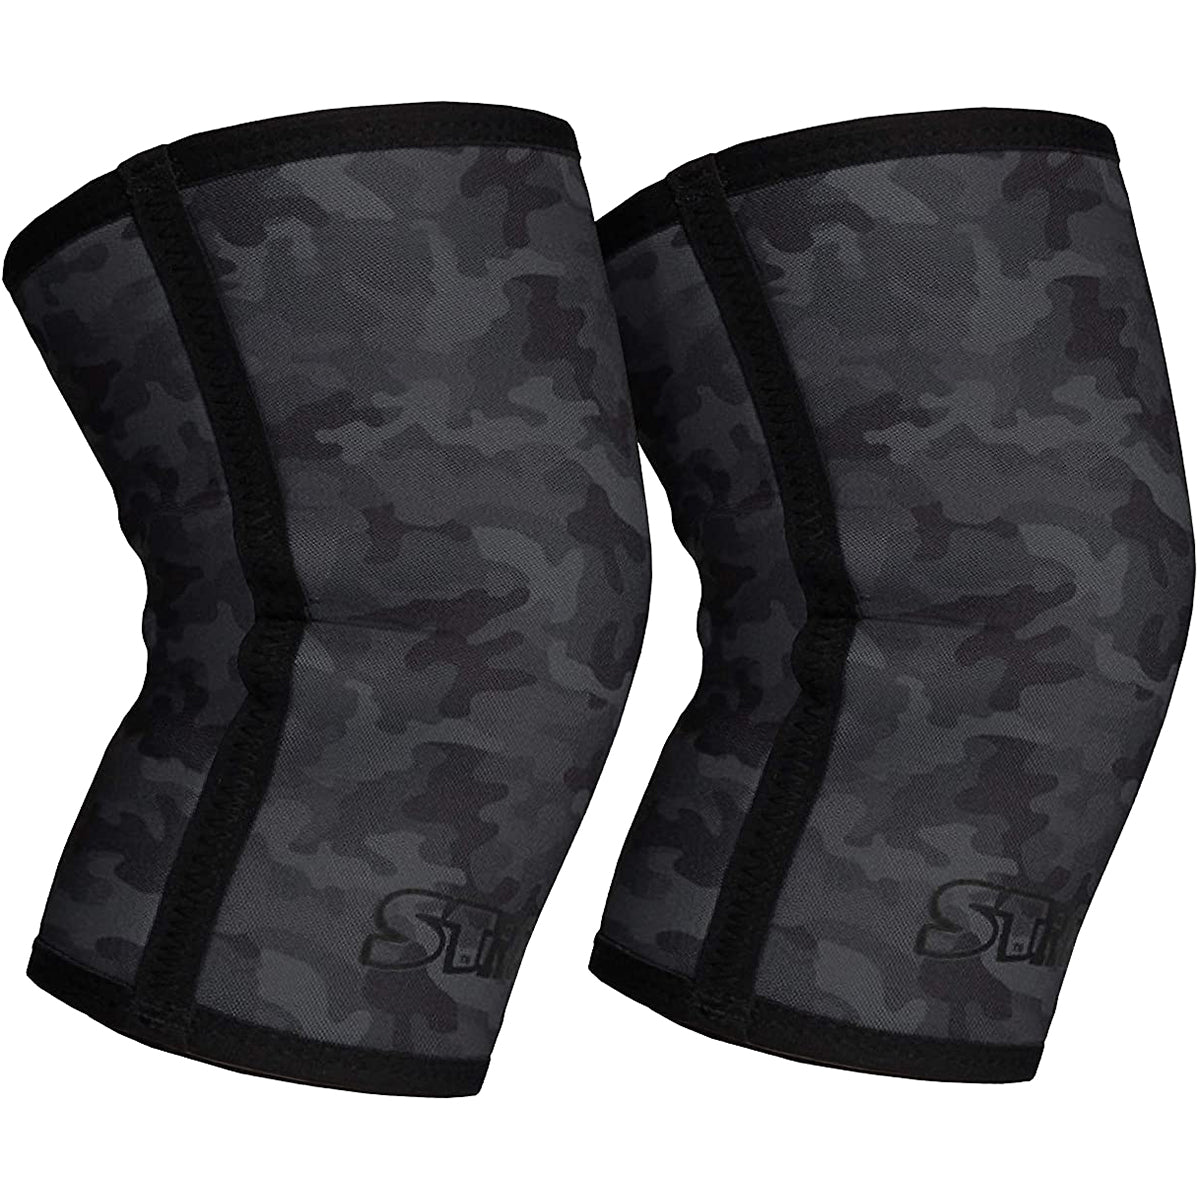  Under Armour Elbow / Knee / Shin Sleeve with Pads